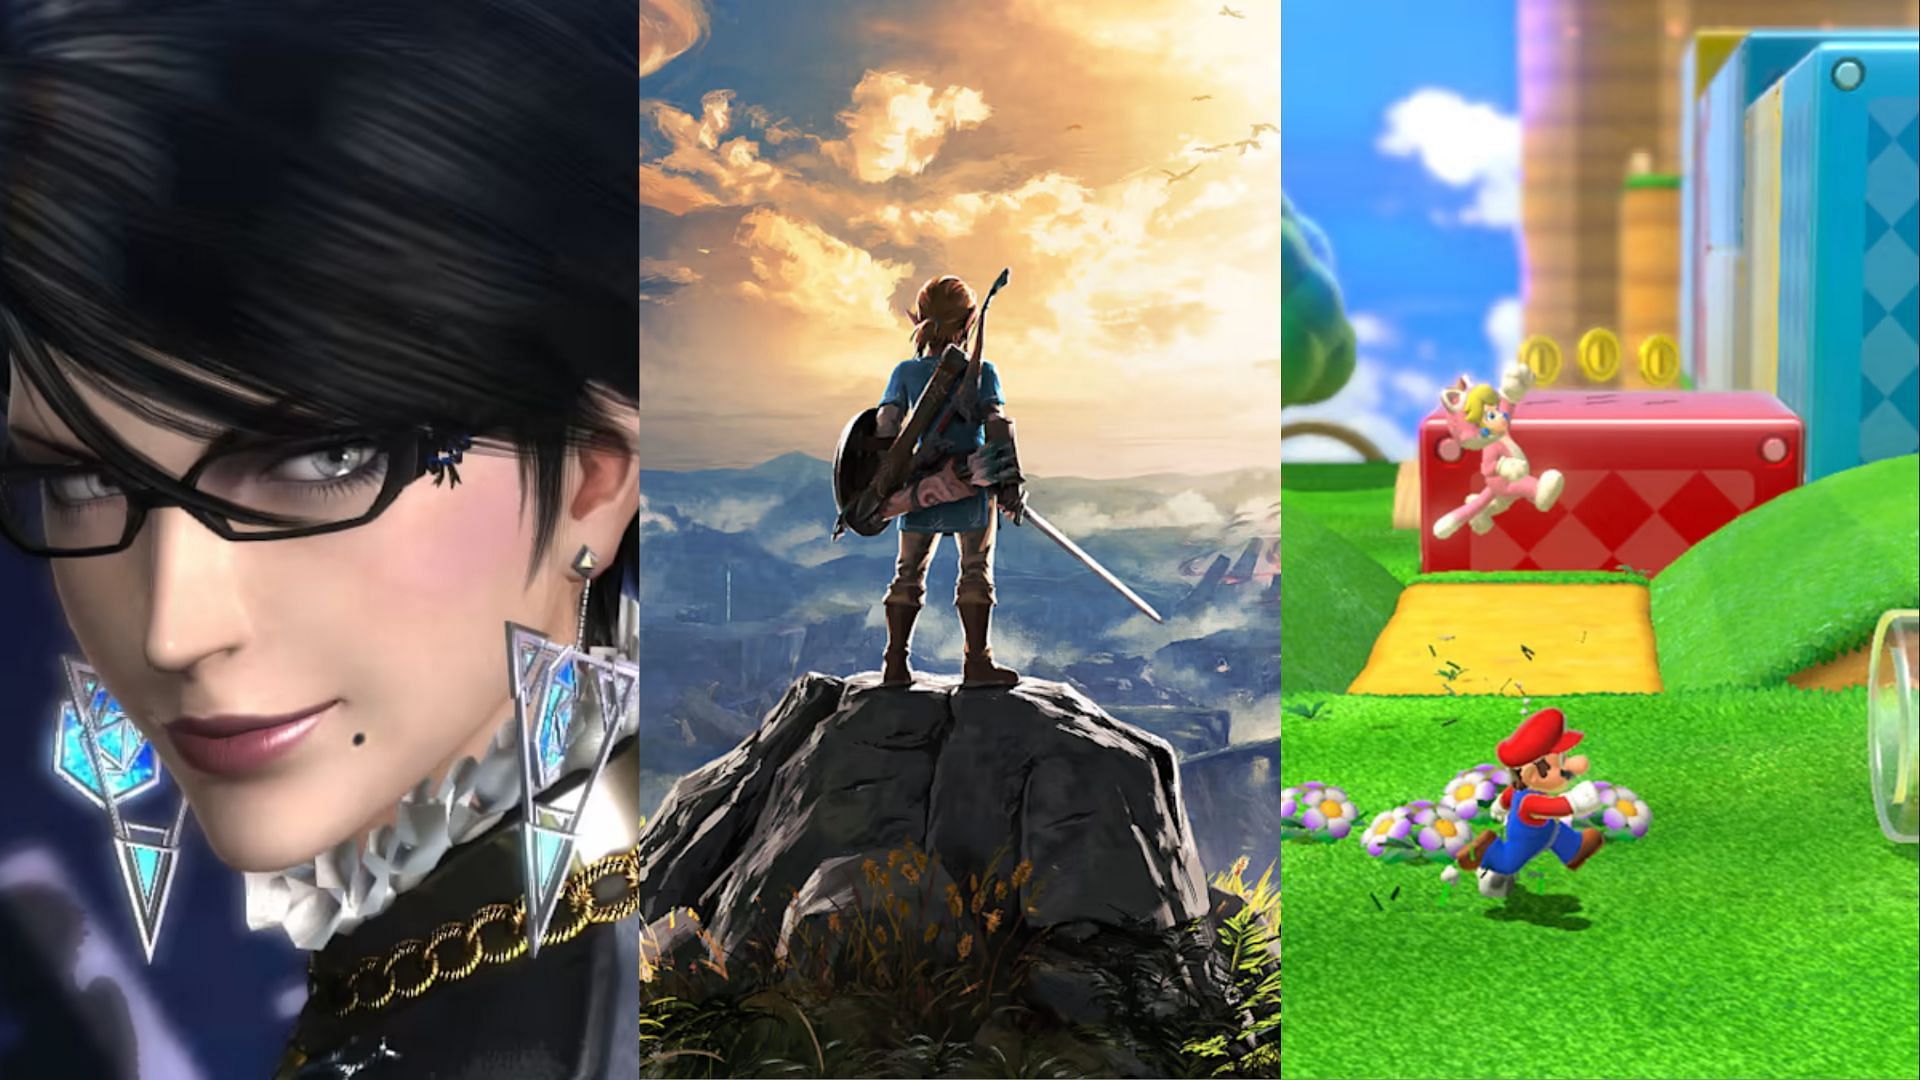 The Wii U has a plethora of games, but which ones are the best? (Image via Nintendo)